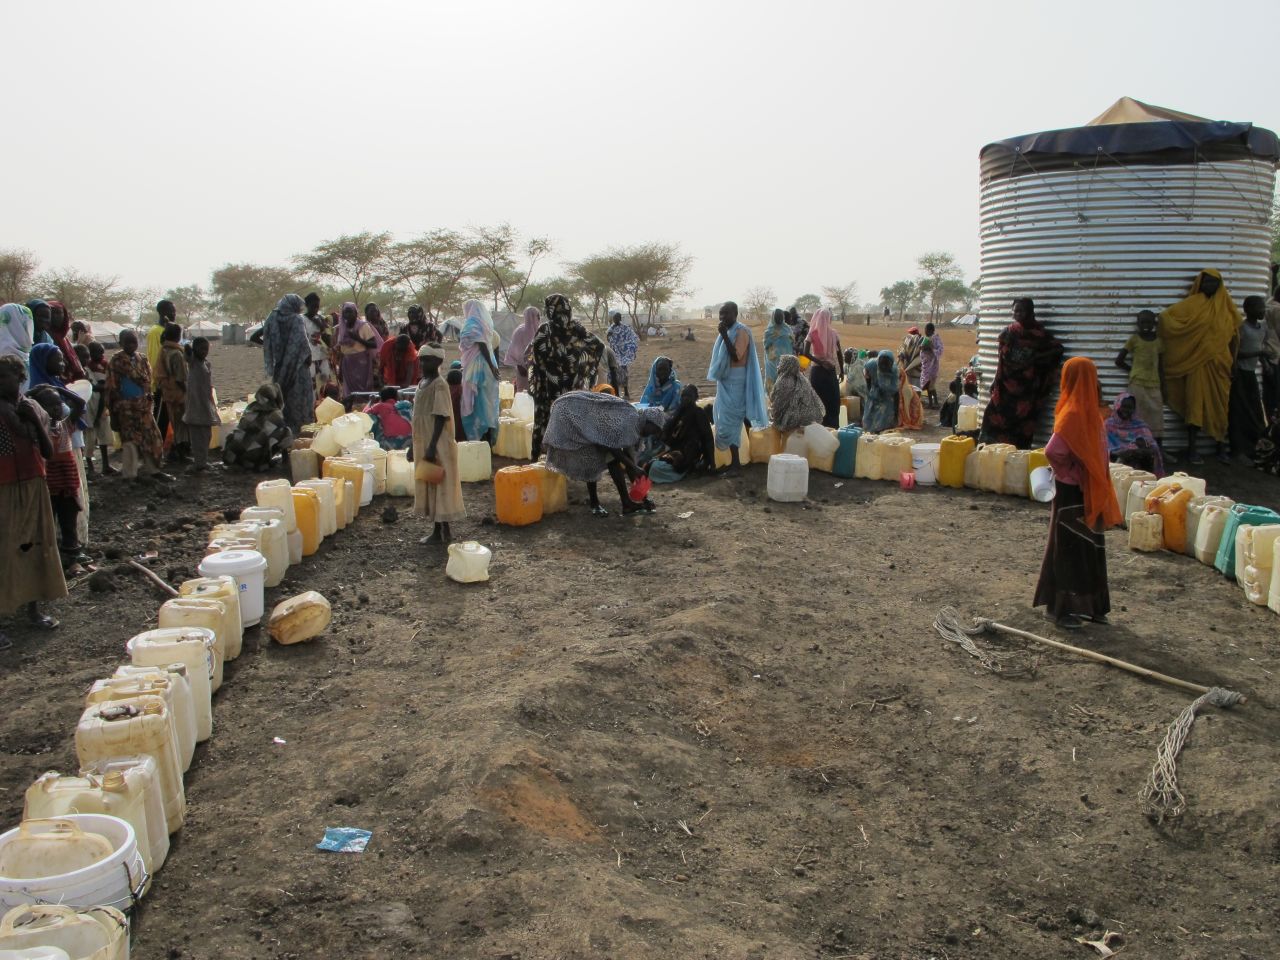 But the huge numbers of people seeking refuge at the camp has placed huge pressure on resources, including water.